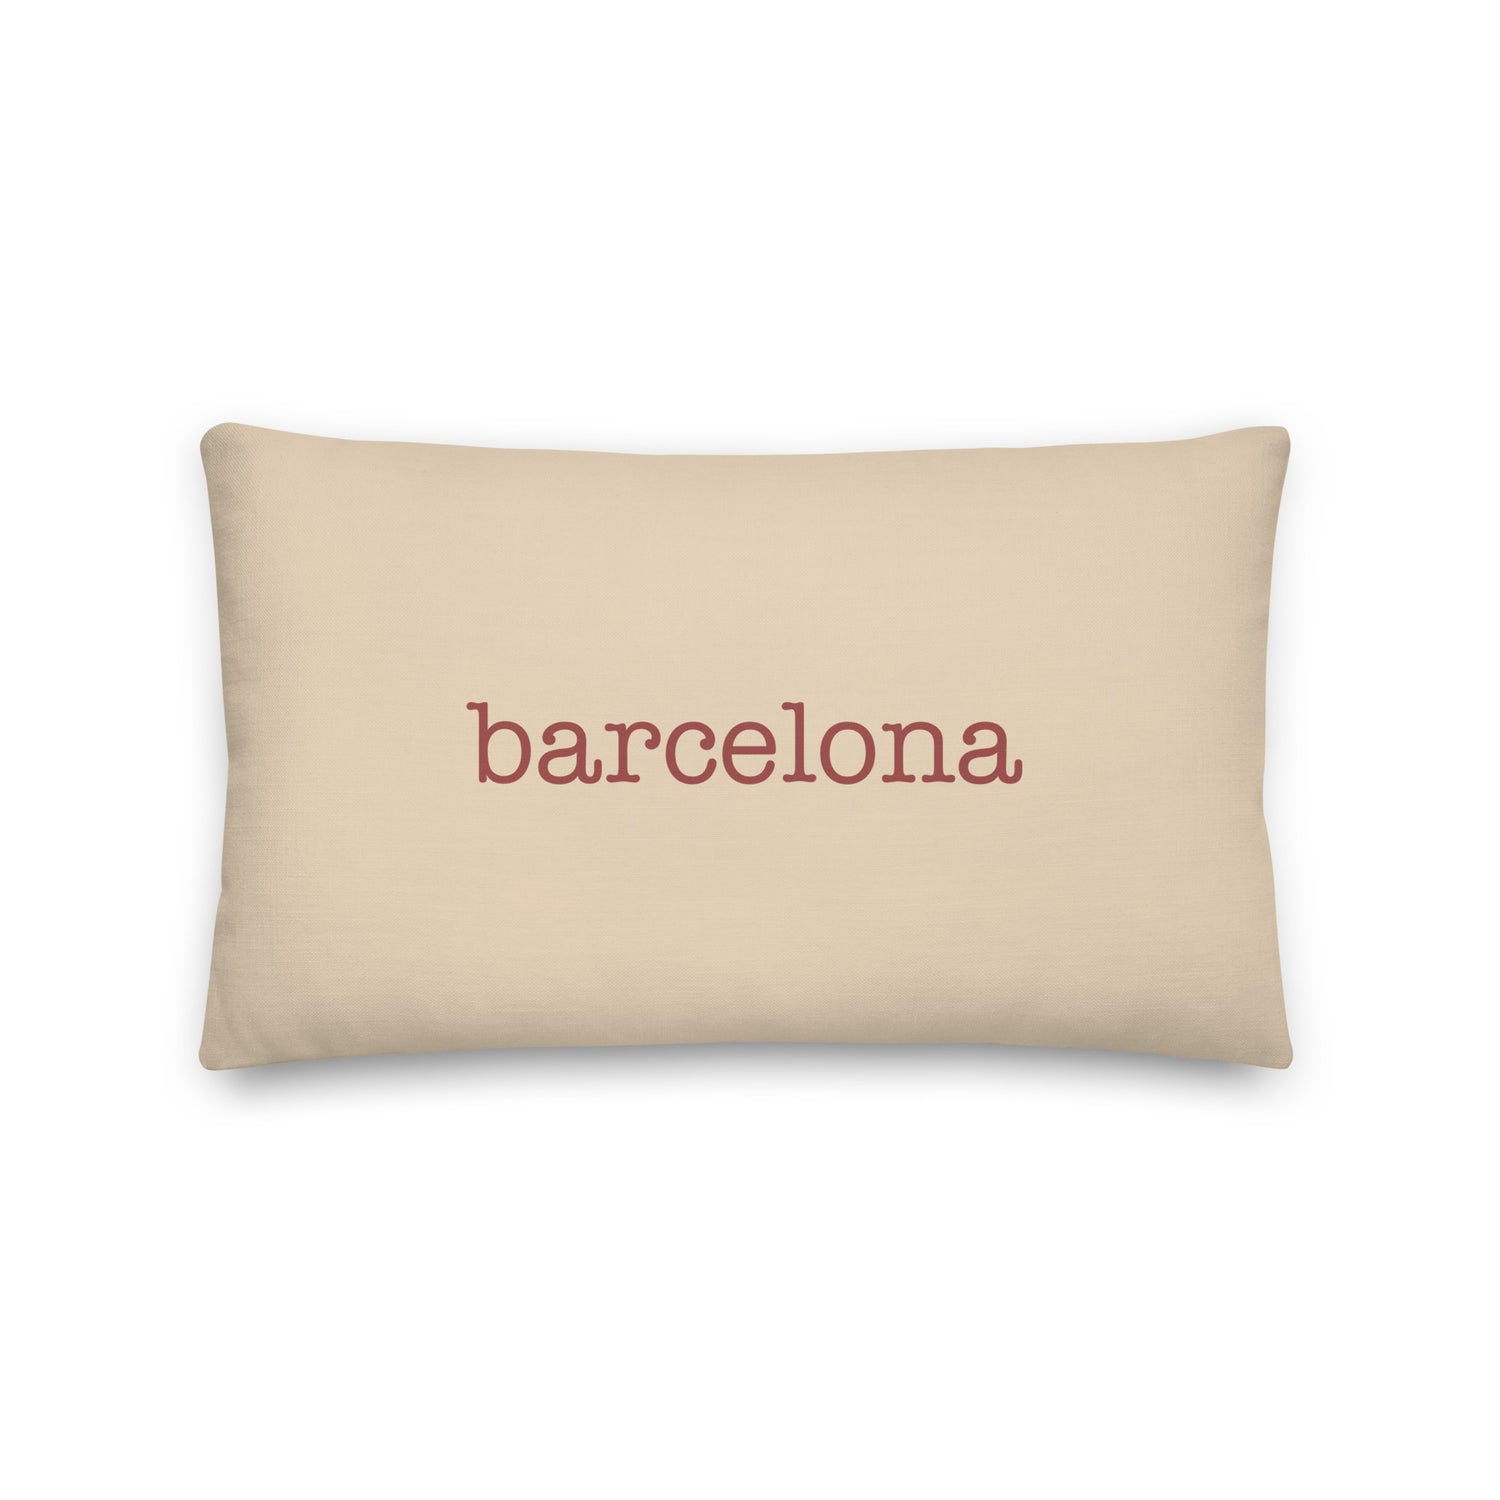 Barcelona Spain Pillows and Blankets • BCN Airport Code